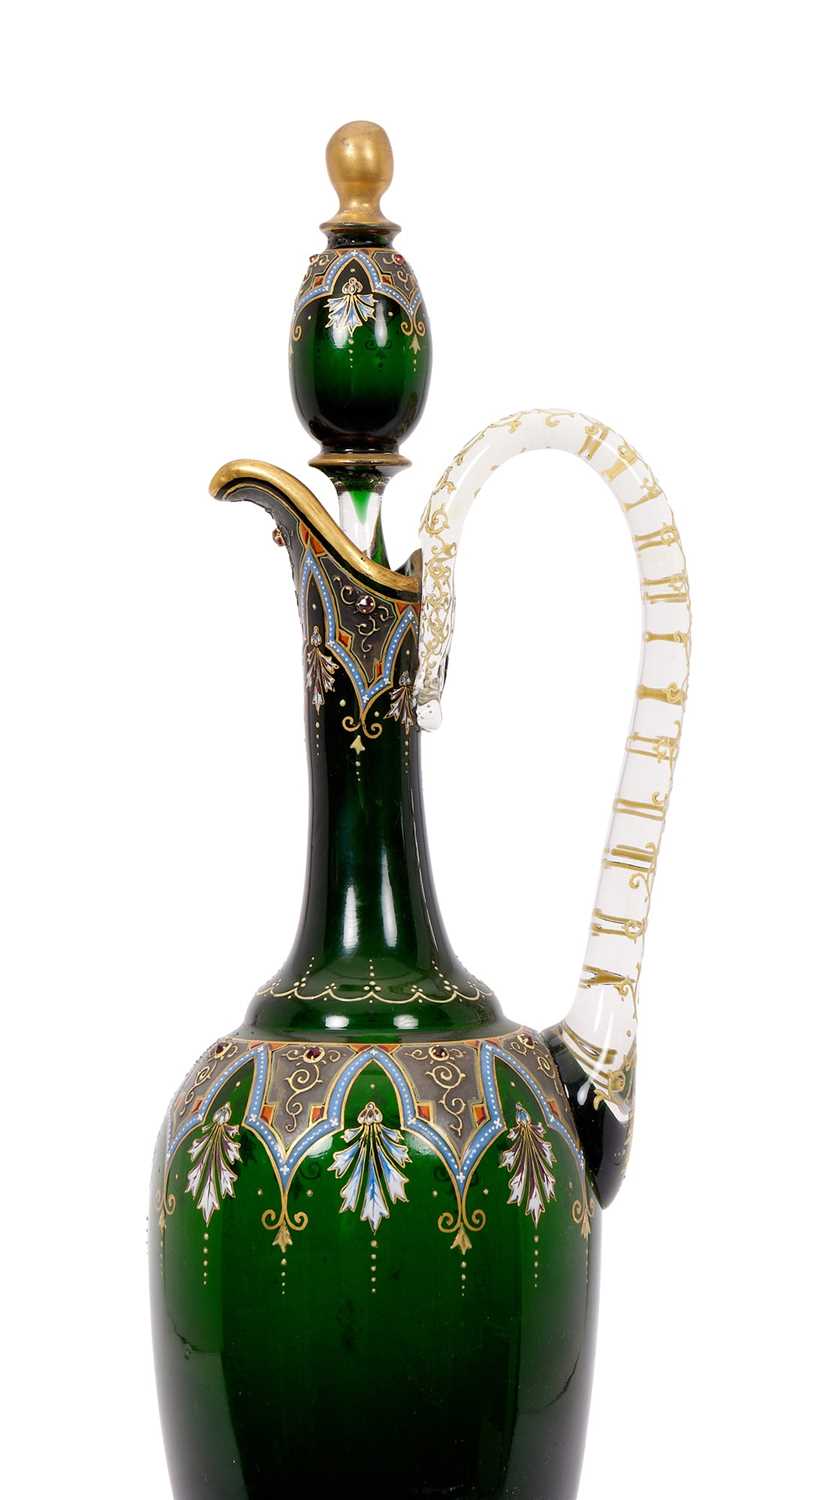 A LATE 19TH CENTURY MOSER ENAMELLED DECANTER FOR THE PERSIAN MARKET - Image 2 of 2